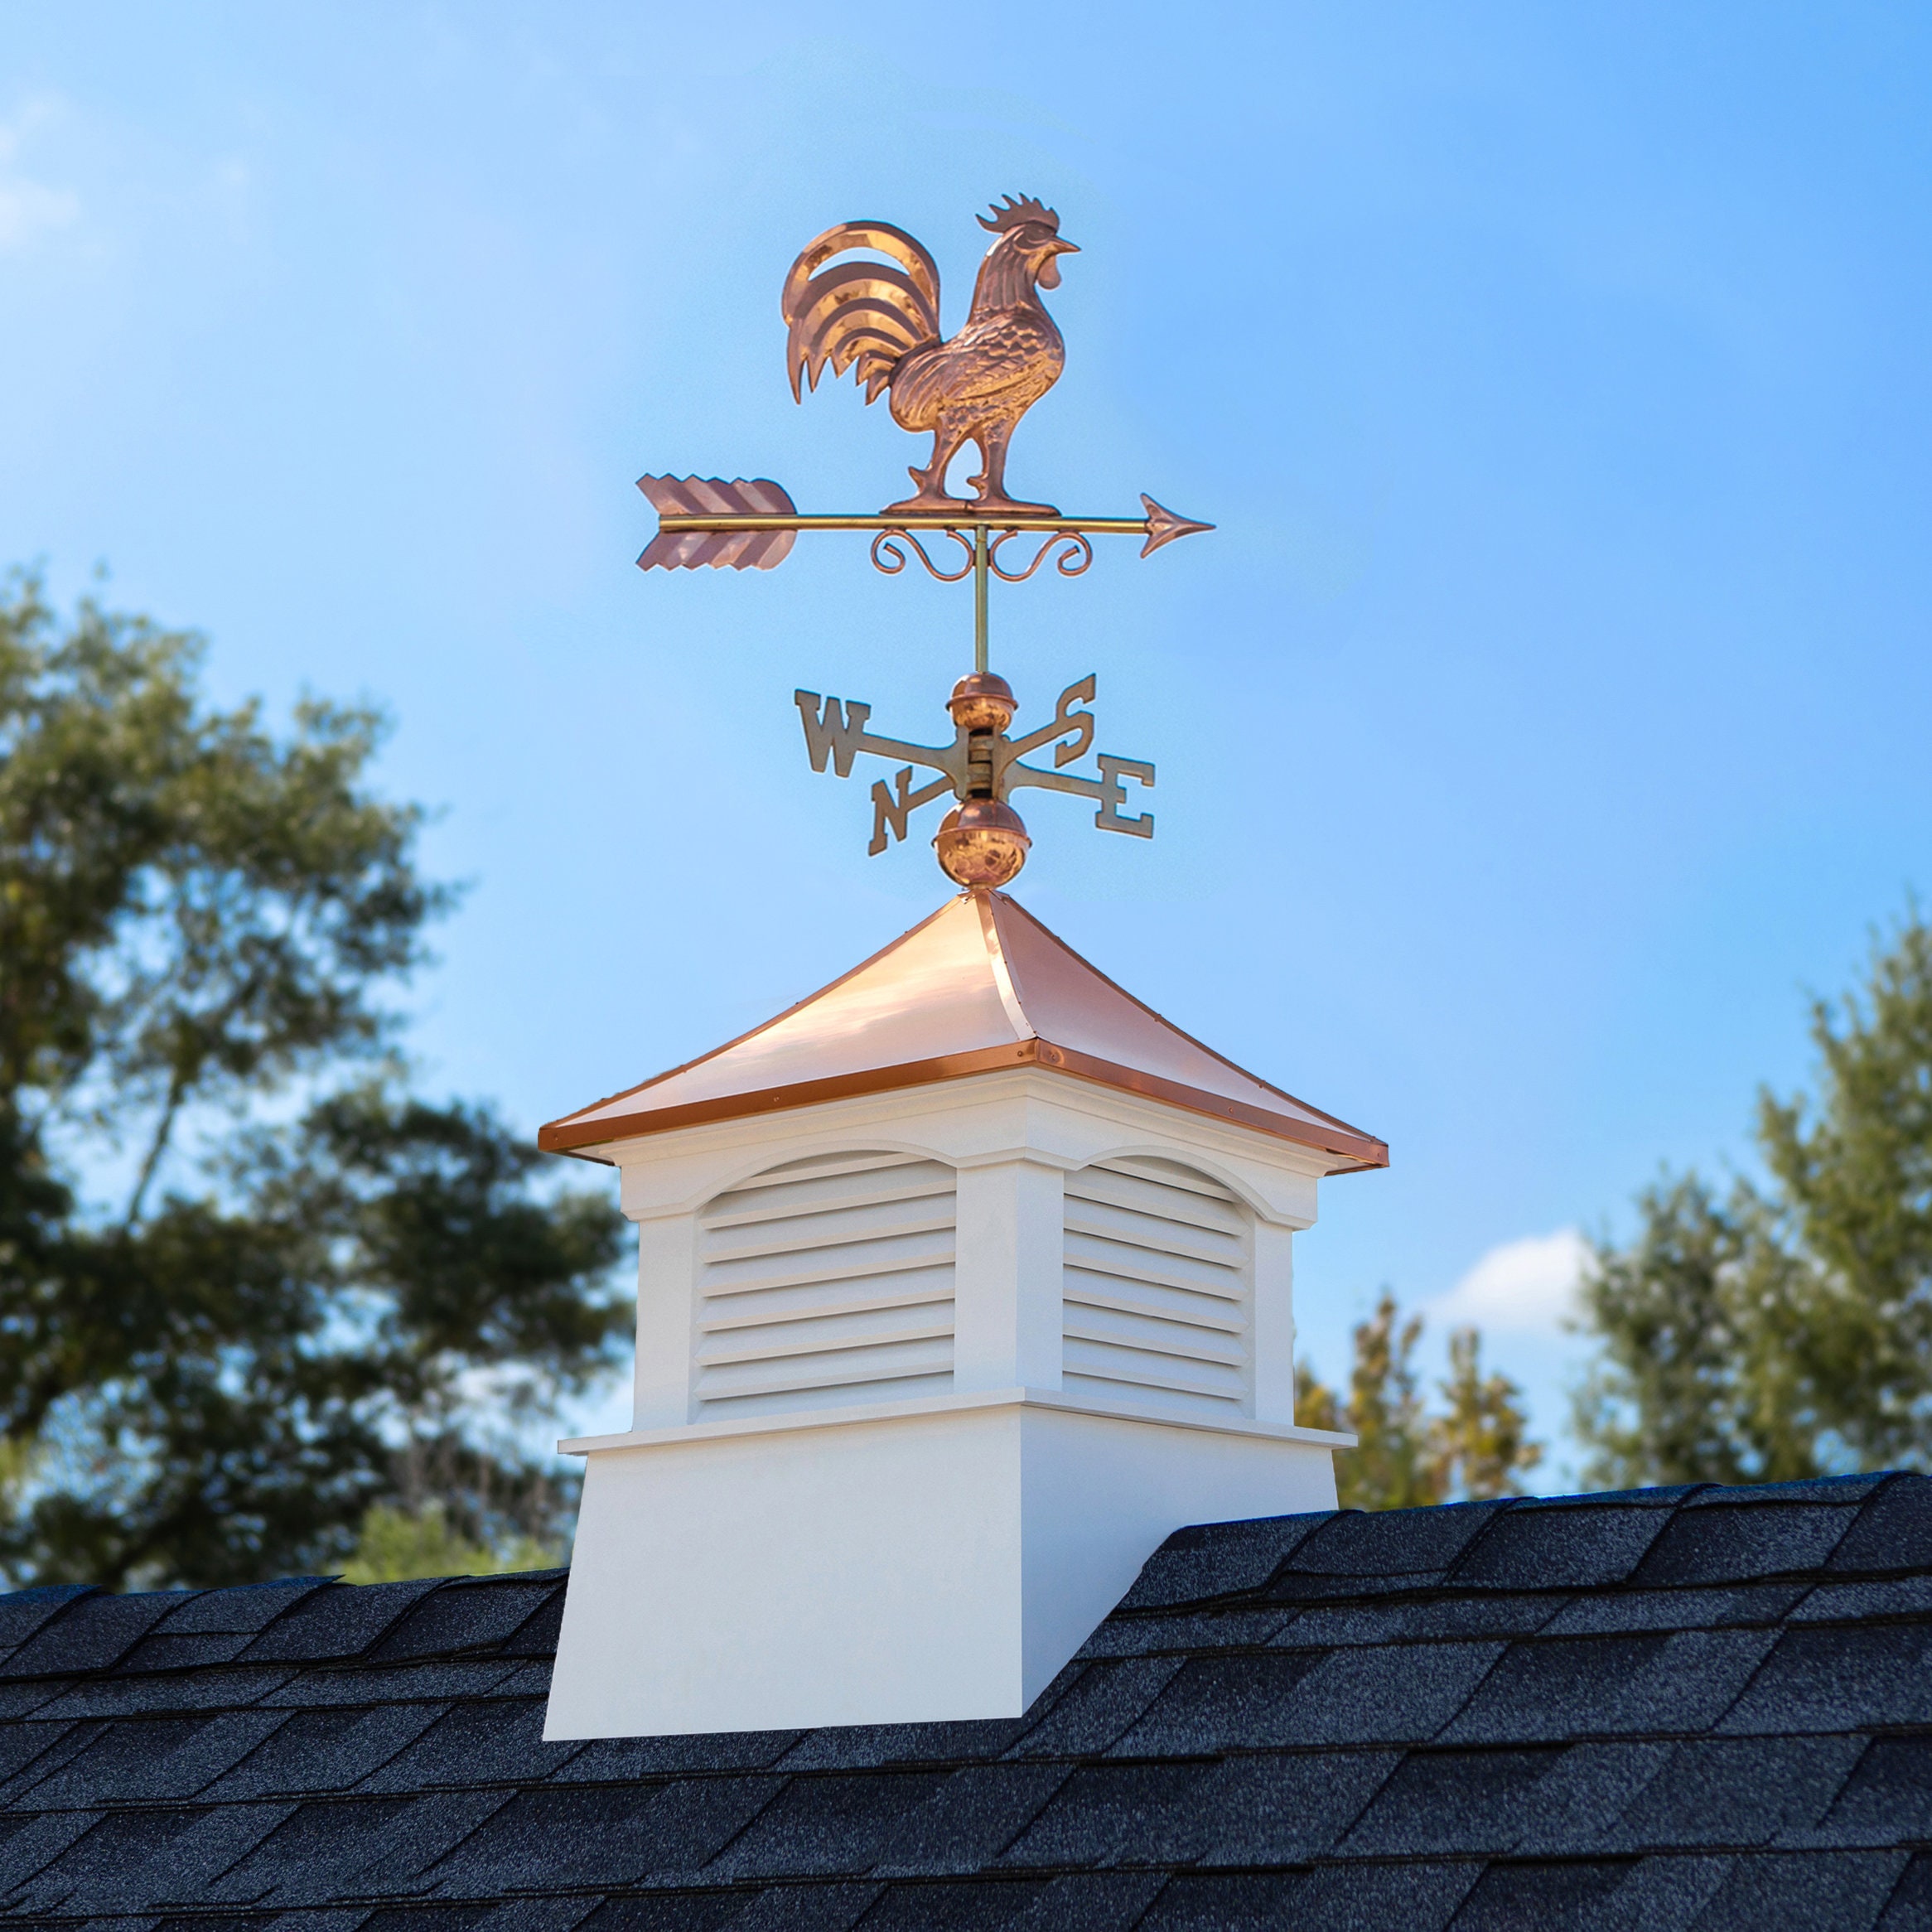 18" Square Coventry Vinyl Cupola with Rooster Weathervane